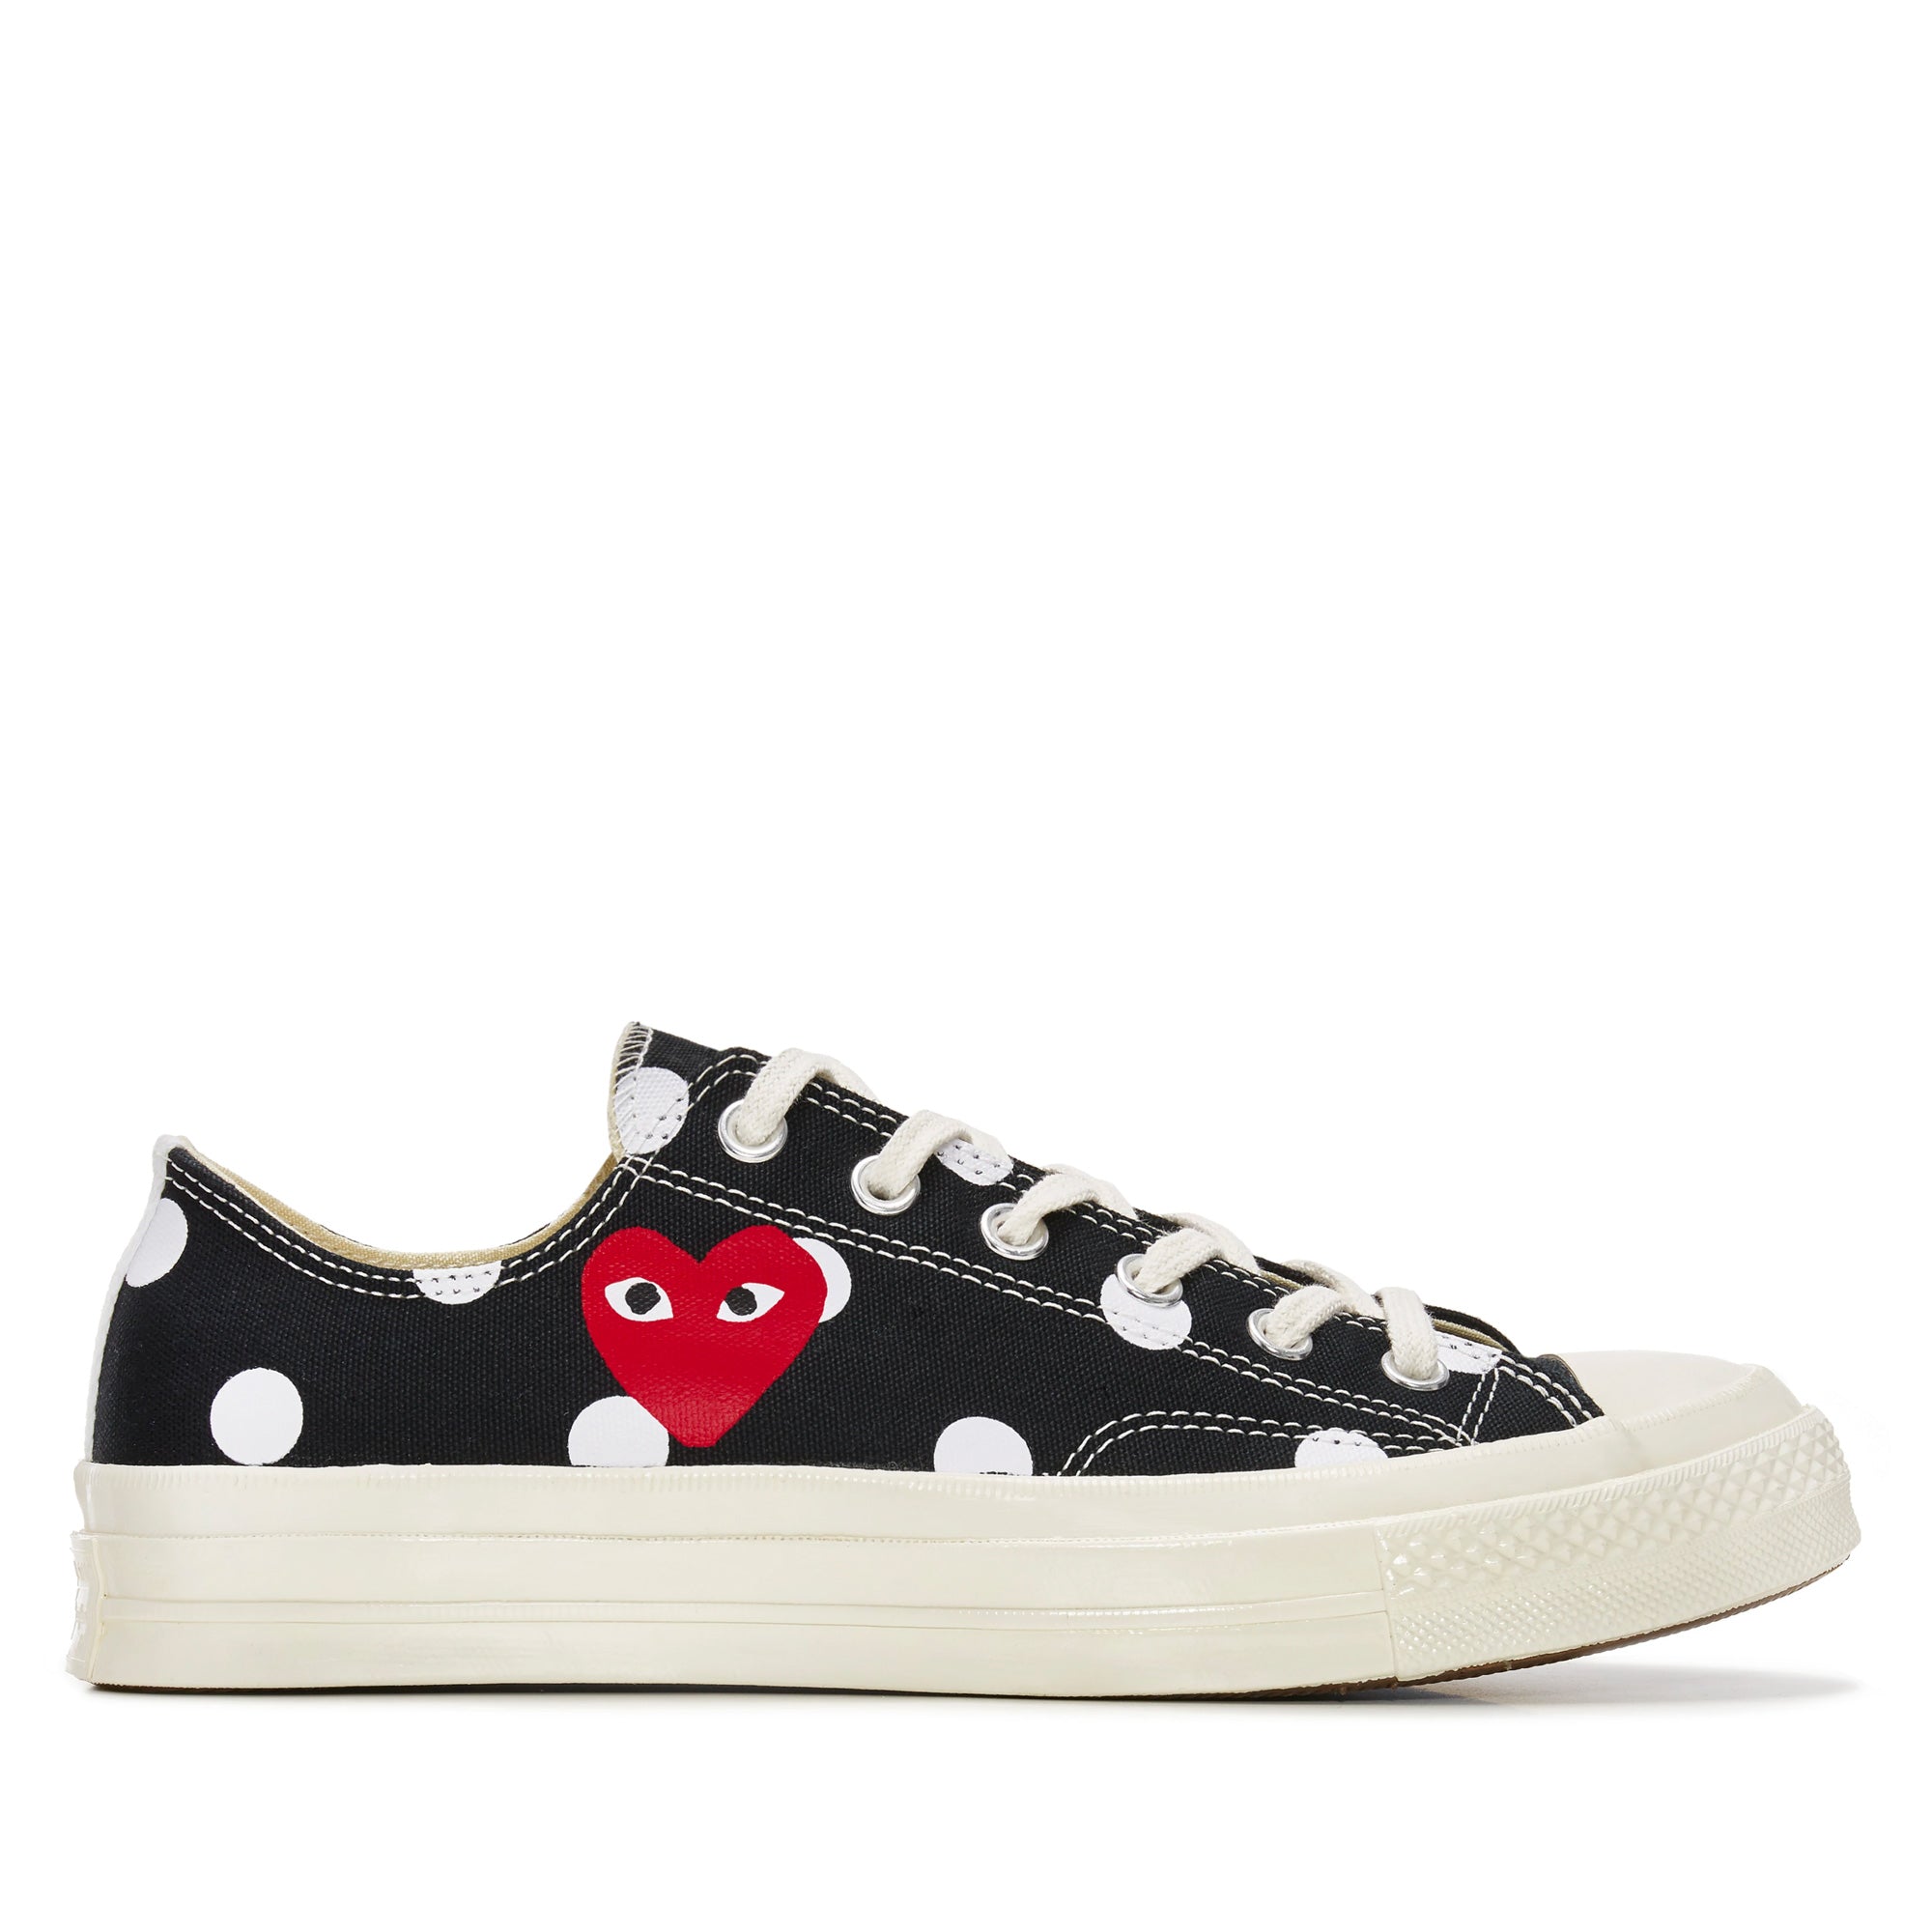 Play Converse - Polka Dot Red Heart Chuck Taylor All Star ’70 Low Sneakers - (Black) view 1